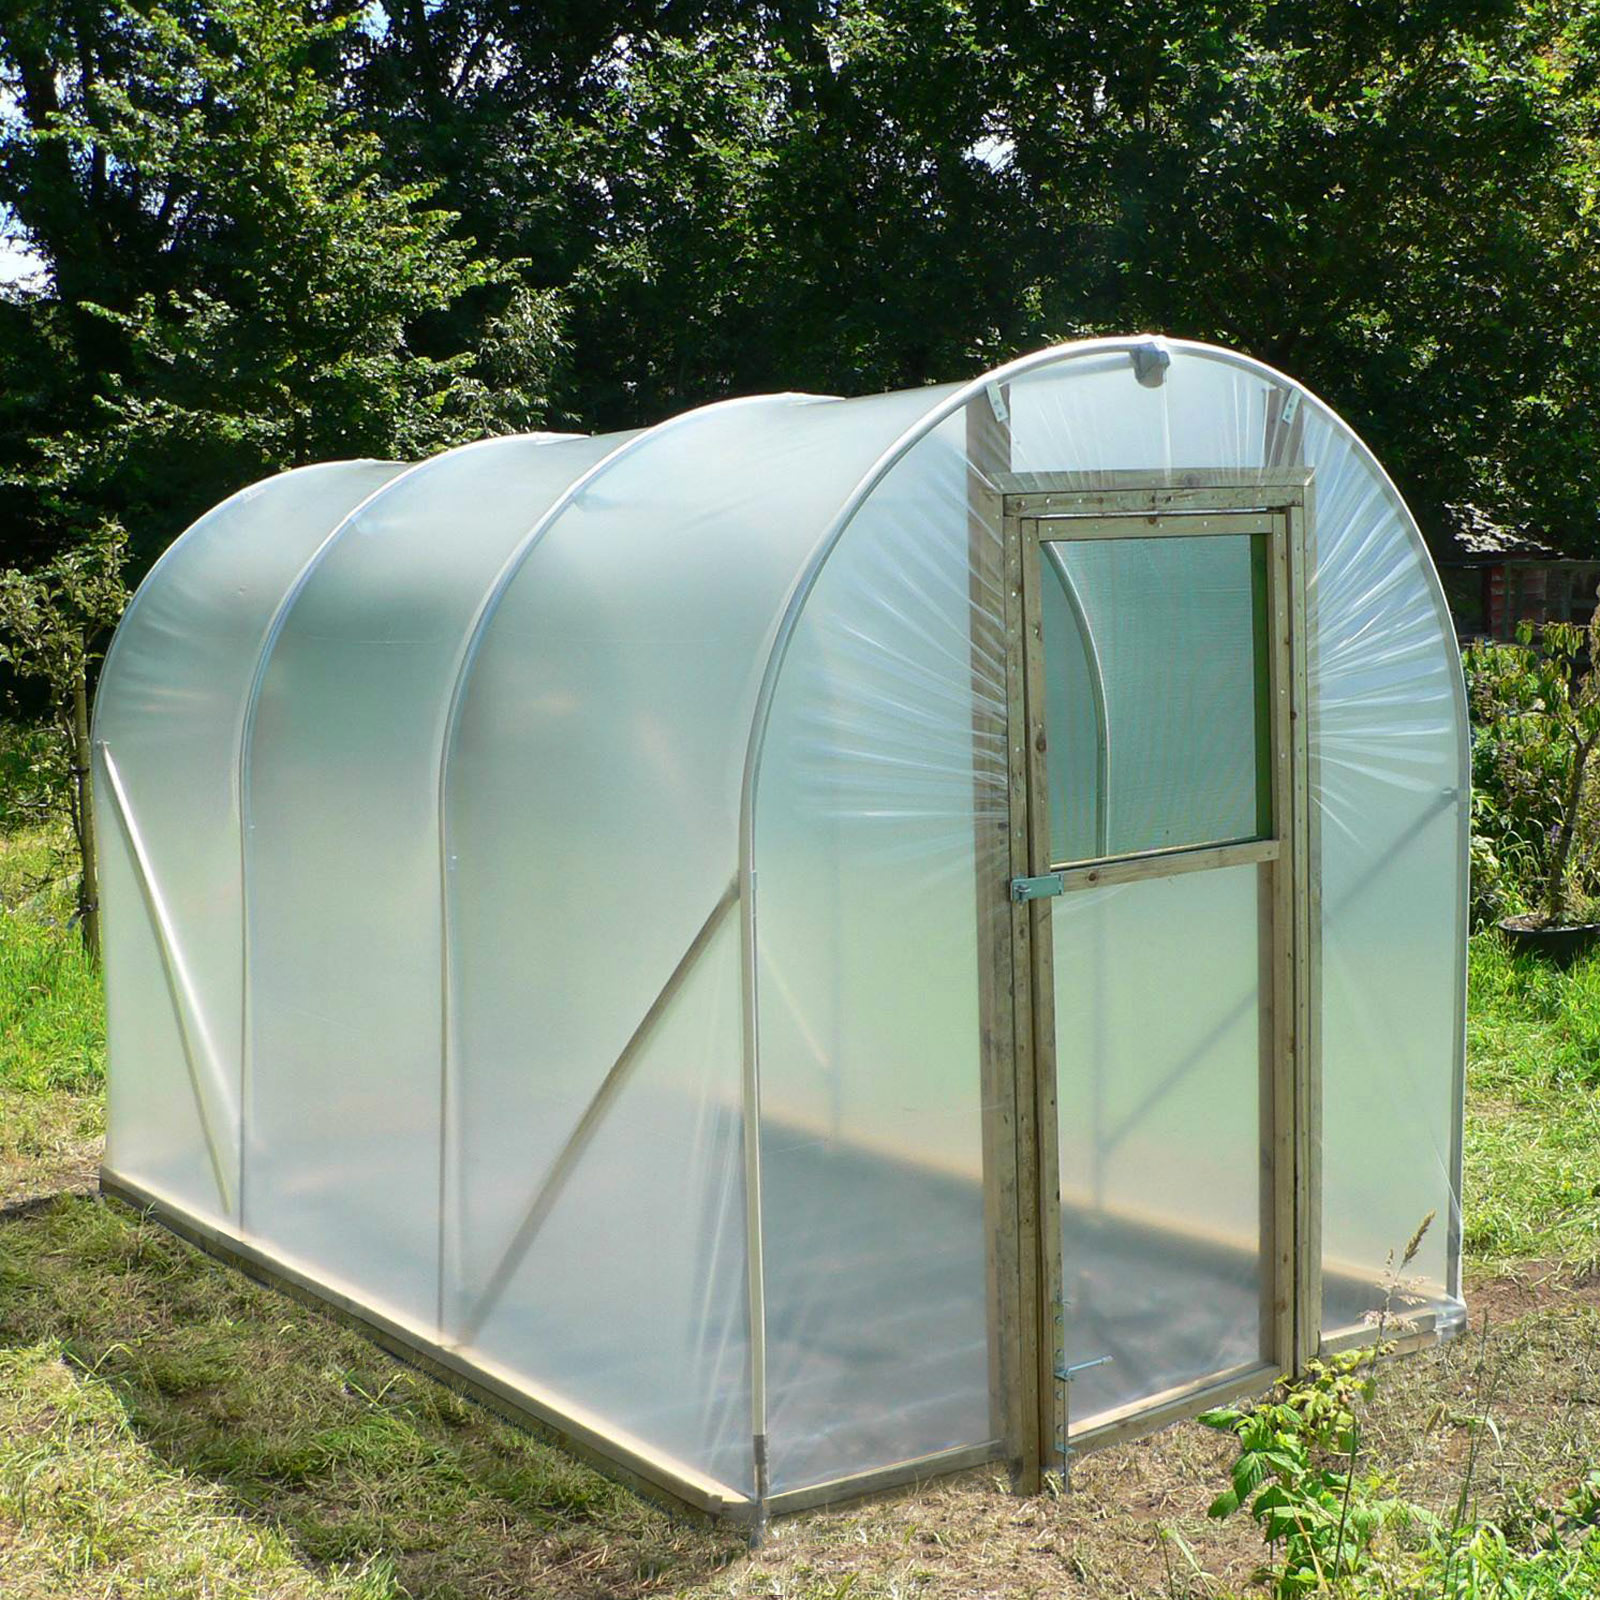 6ft Wide Polytunnel | Small 6ft Wide Domestic Polytunnels For Sale